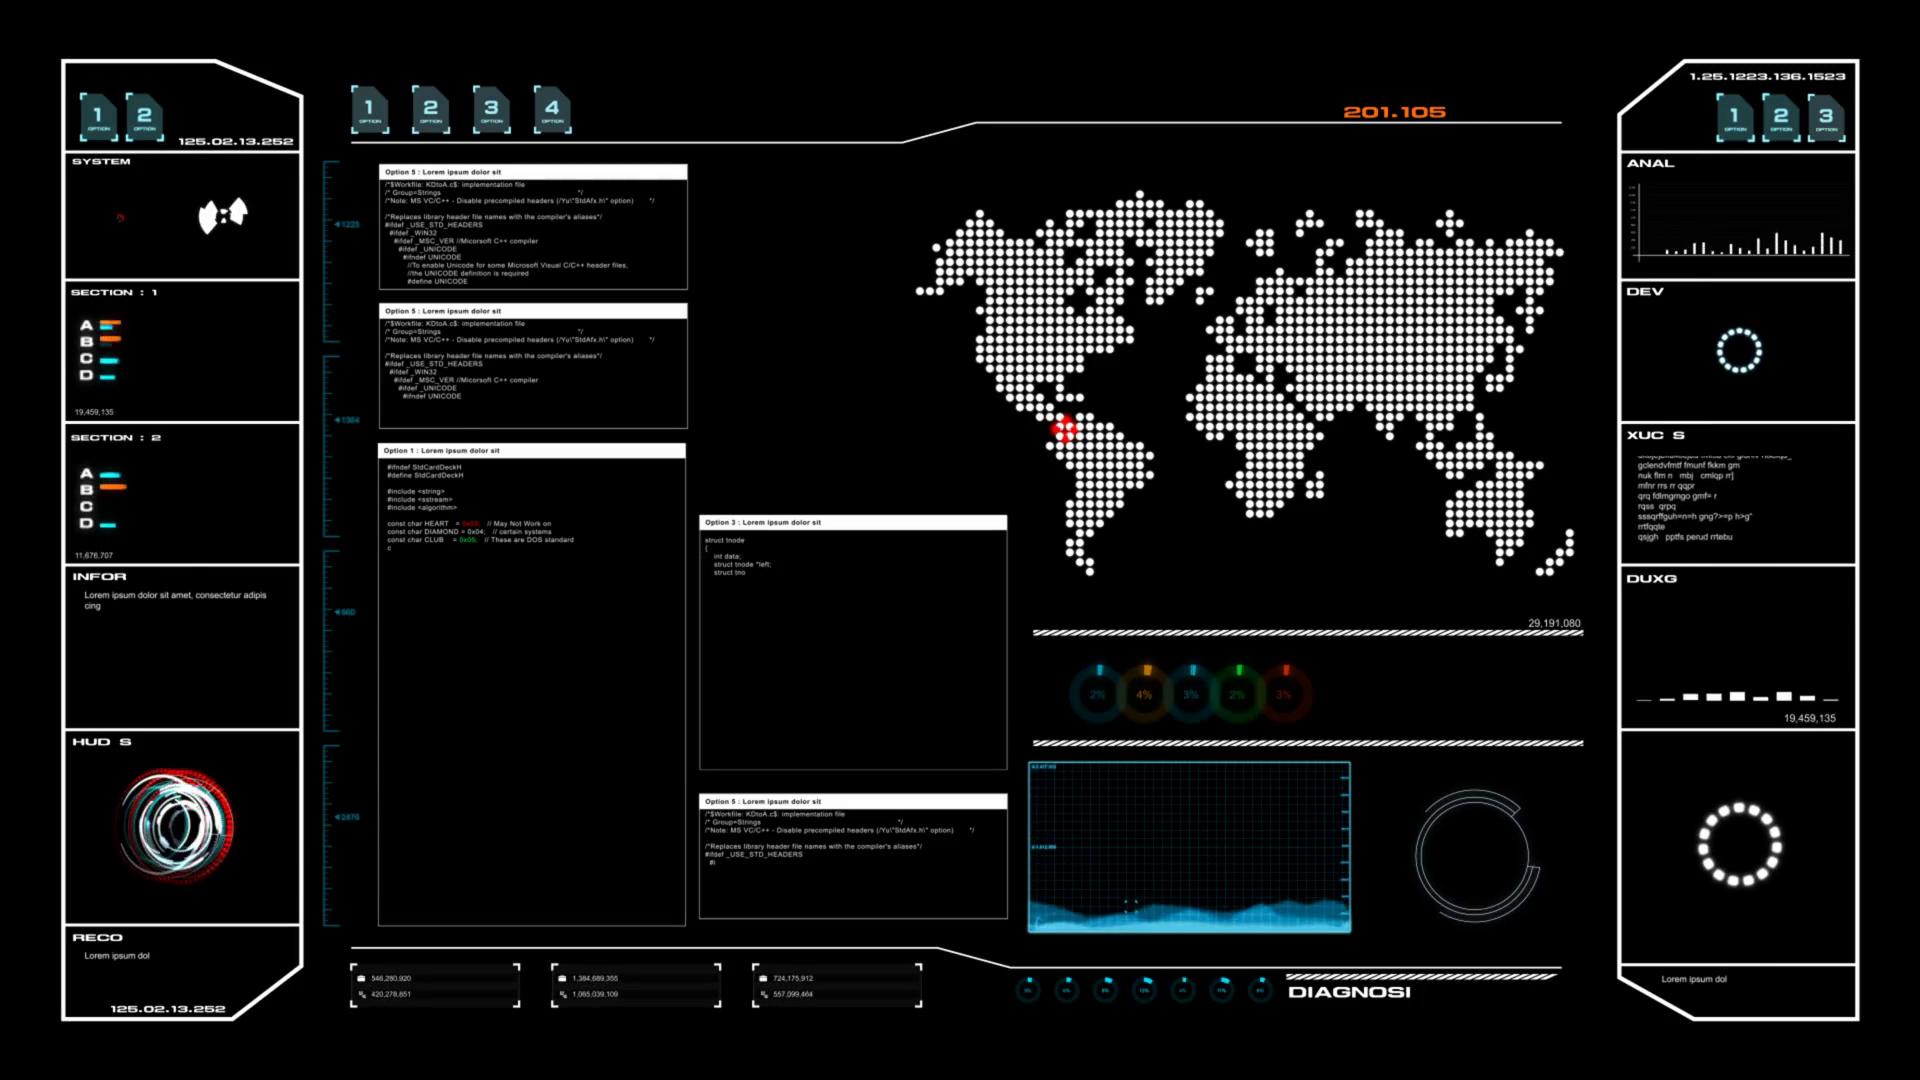 Hud Use Agreement 4k Animation Ui User Interface With World Map Data Hud Pi Bar Text Box Table And Element On Dark Abstract Background For Futuristic Technology Concept